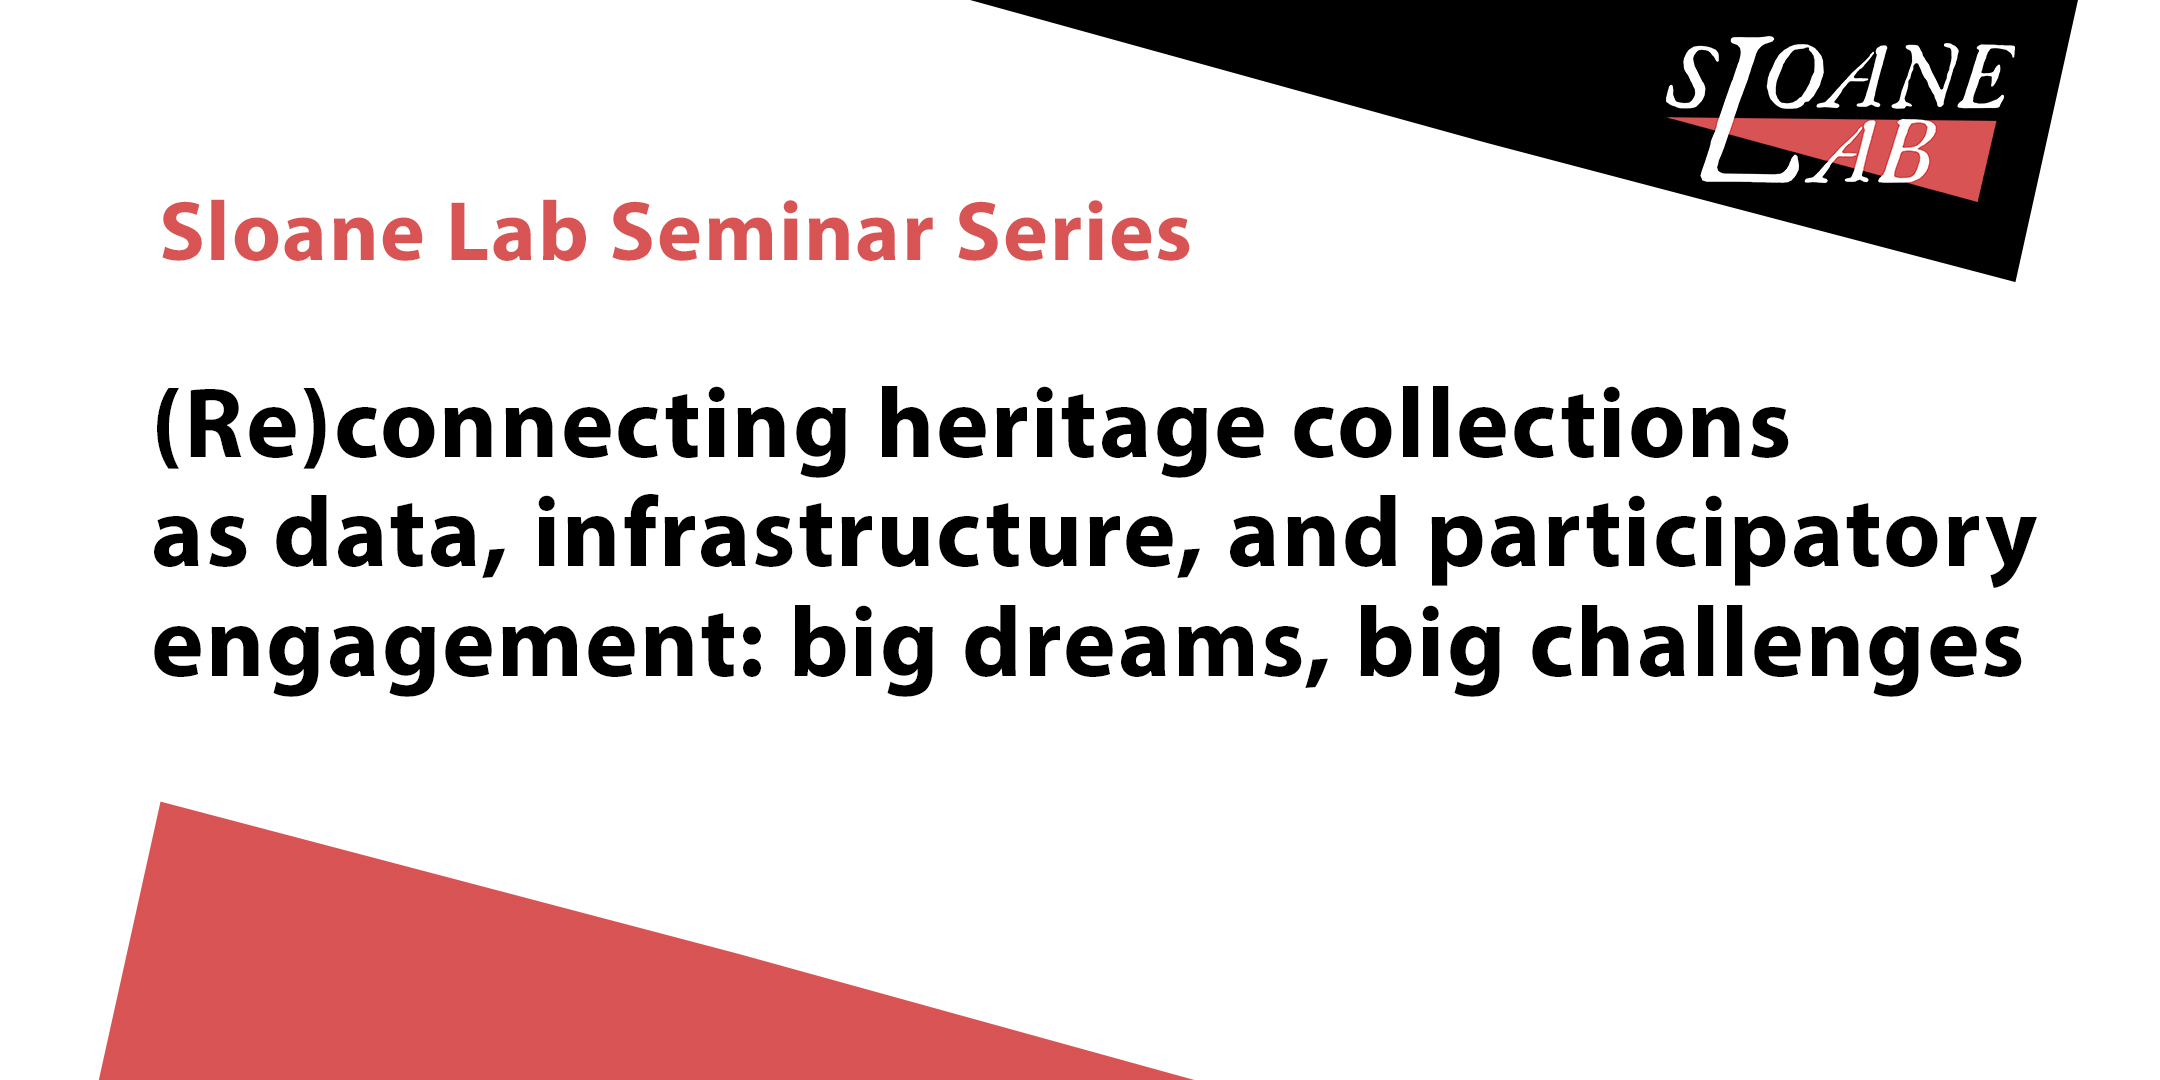 (Re)connecting heritage collections as data, infrastructure, and participatory engagement: big dreams, big challenges - Sloane Lab online seminar series